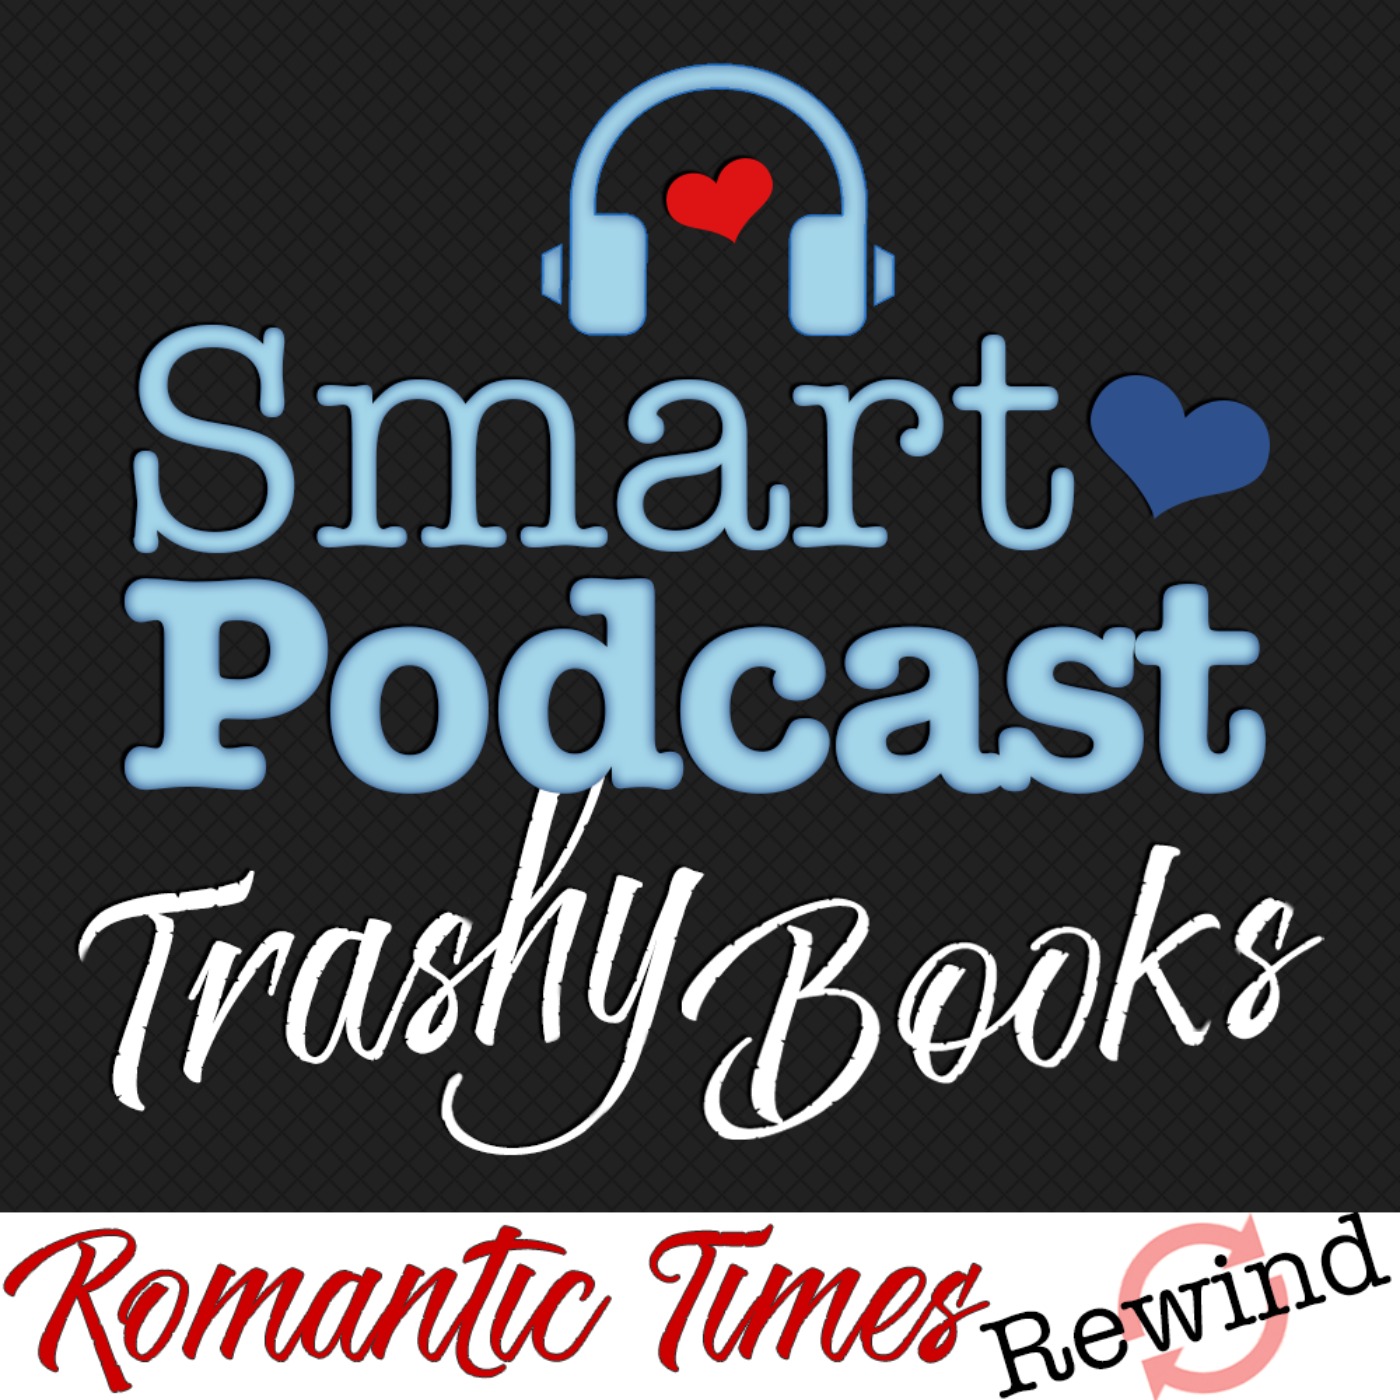 584. Romantic Times Rewind: May 2014 with Amanda